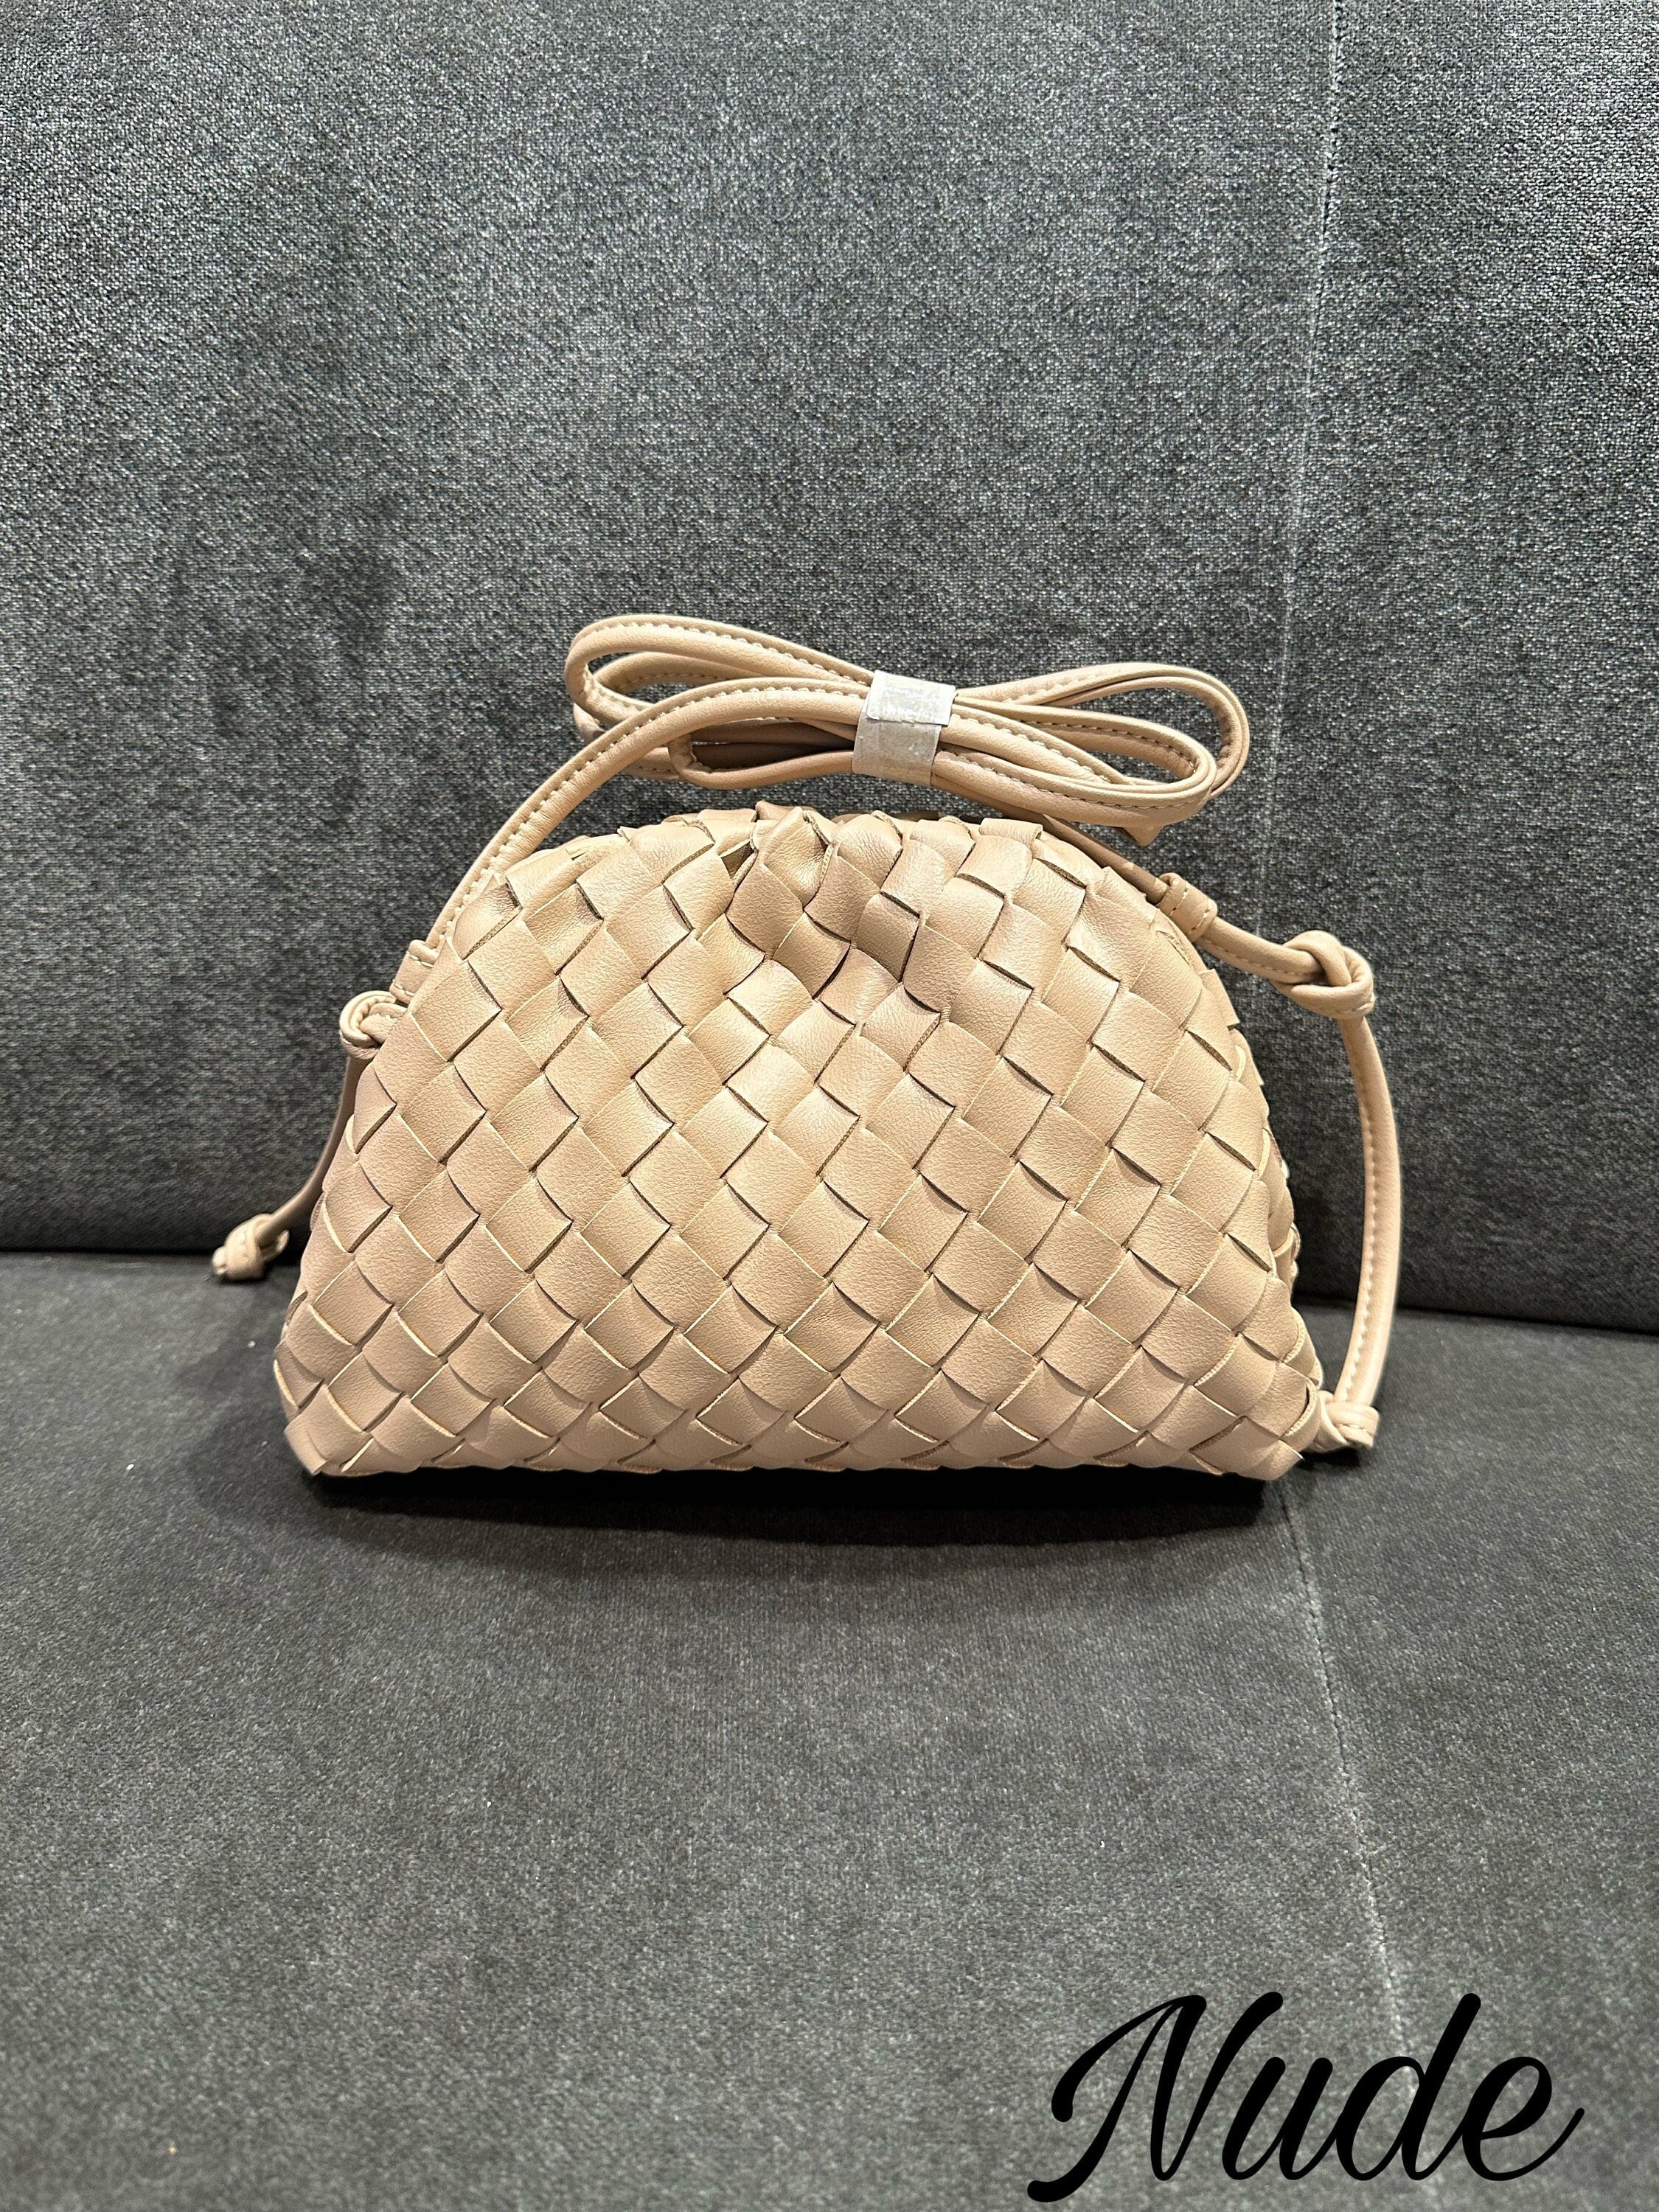 Soft Woven Pouch Bag- Cute Gift Handbags Leather Clutch Bags- Cloud Bags- Woven Bag- Braided Bag- Evening Crossbody Bag- Faux Leather Clutch